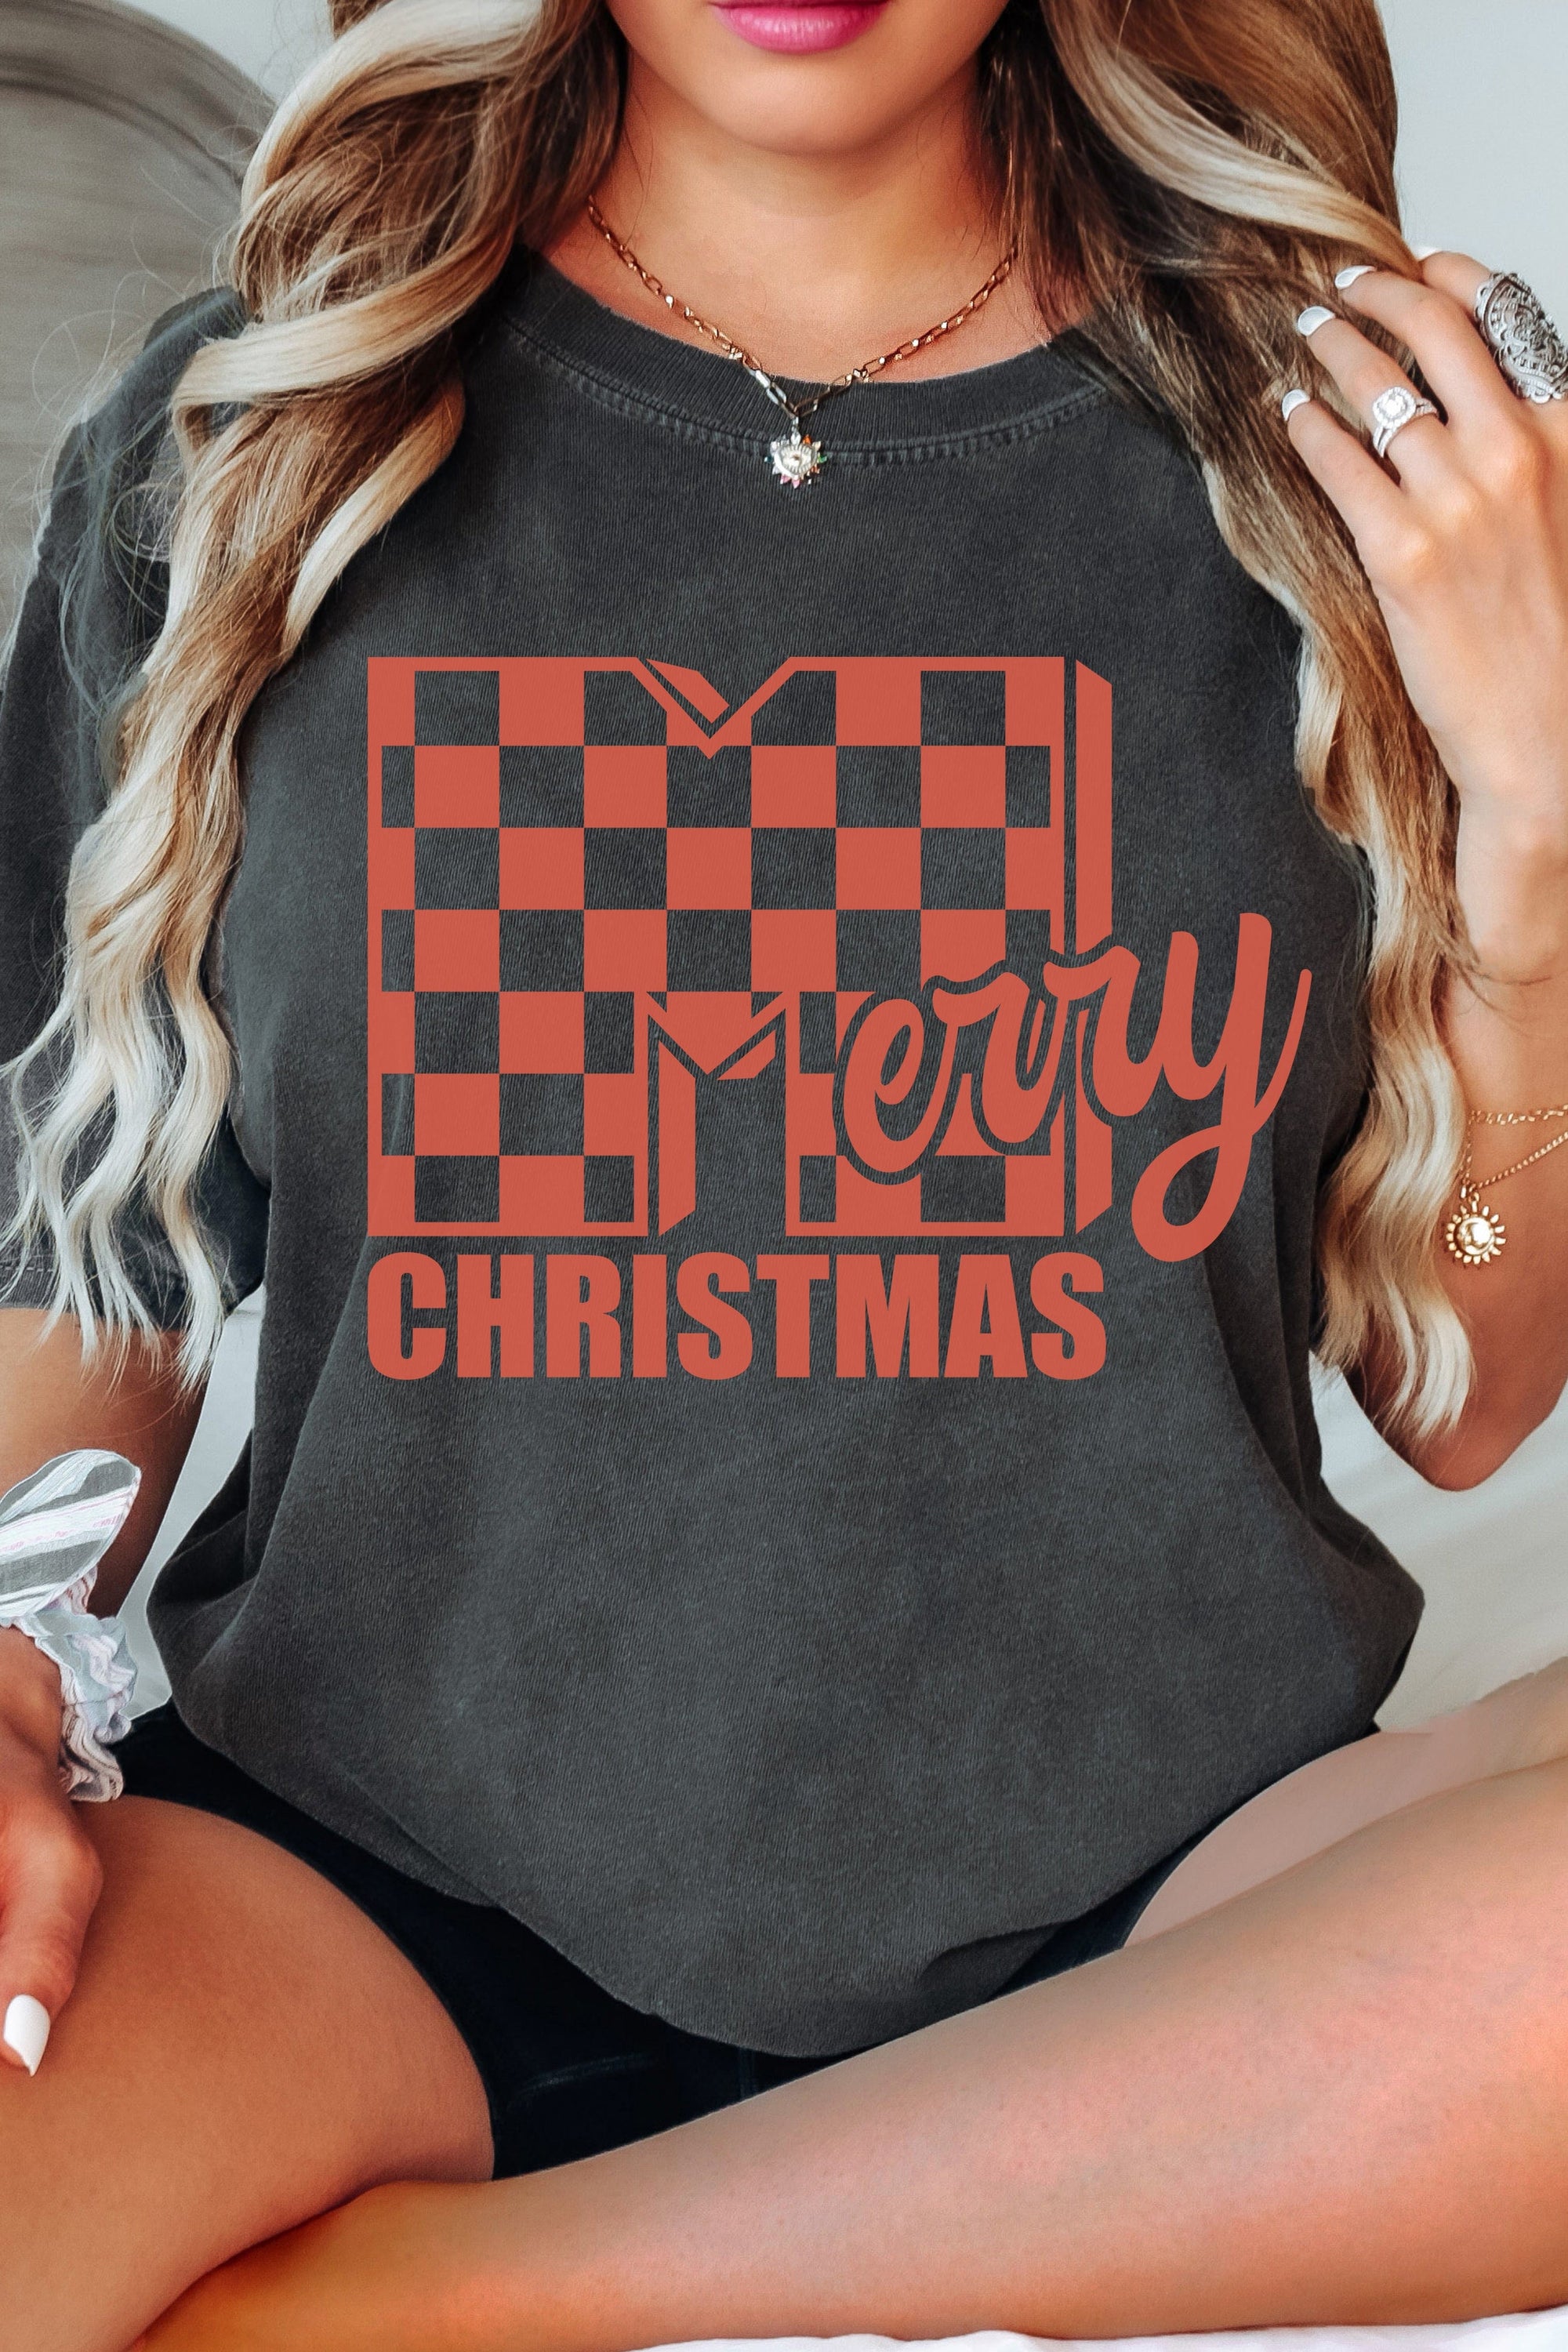 Merry Christmas T-Shirt Red Checkered